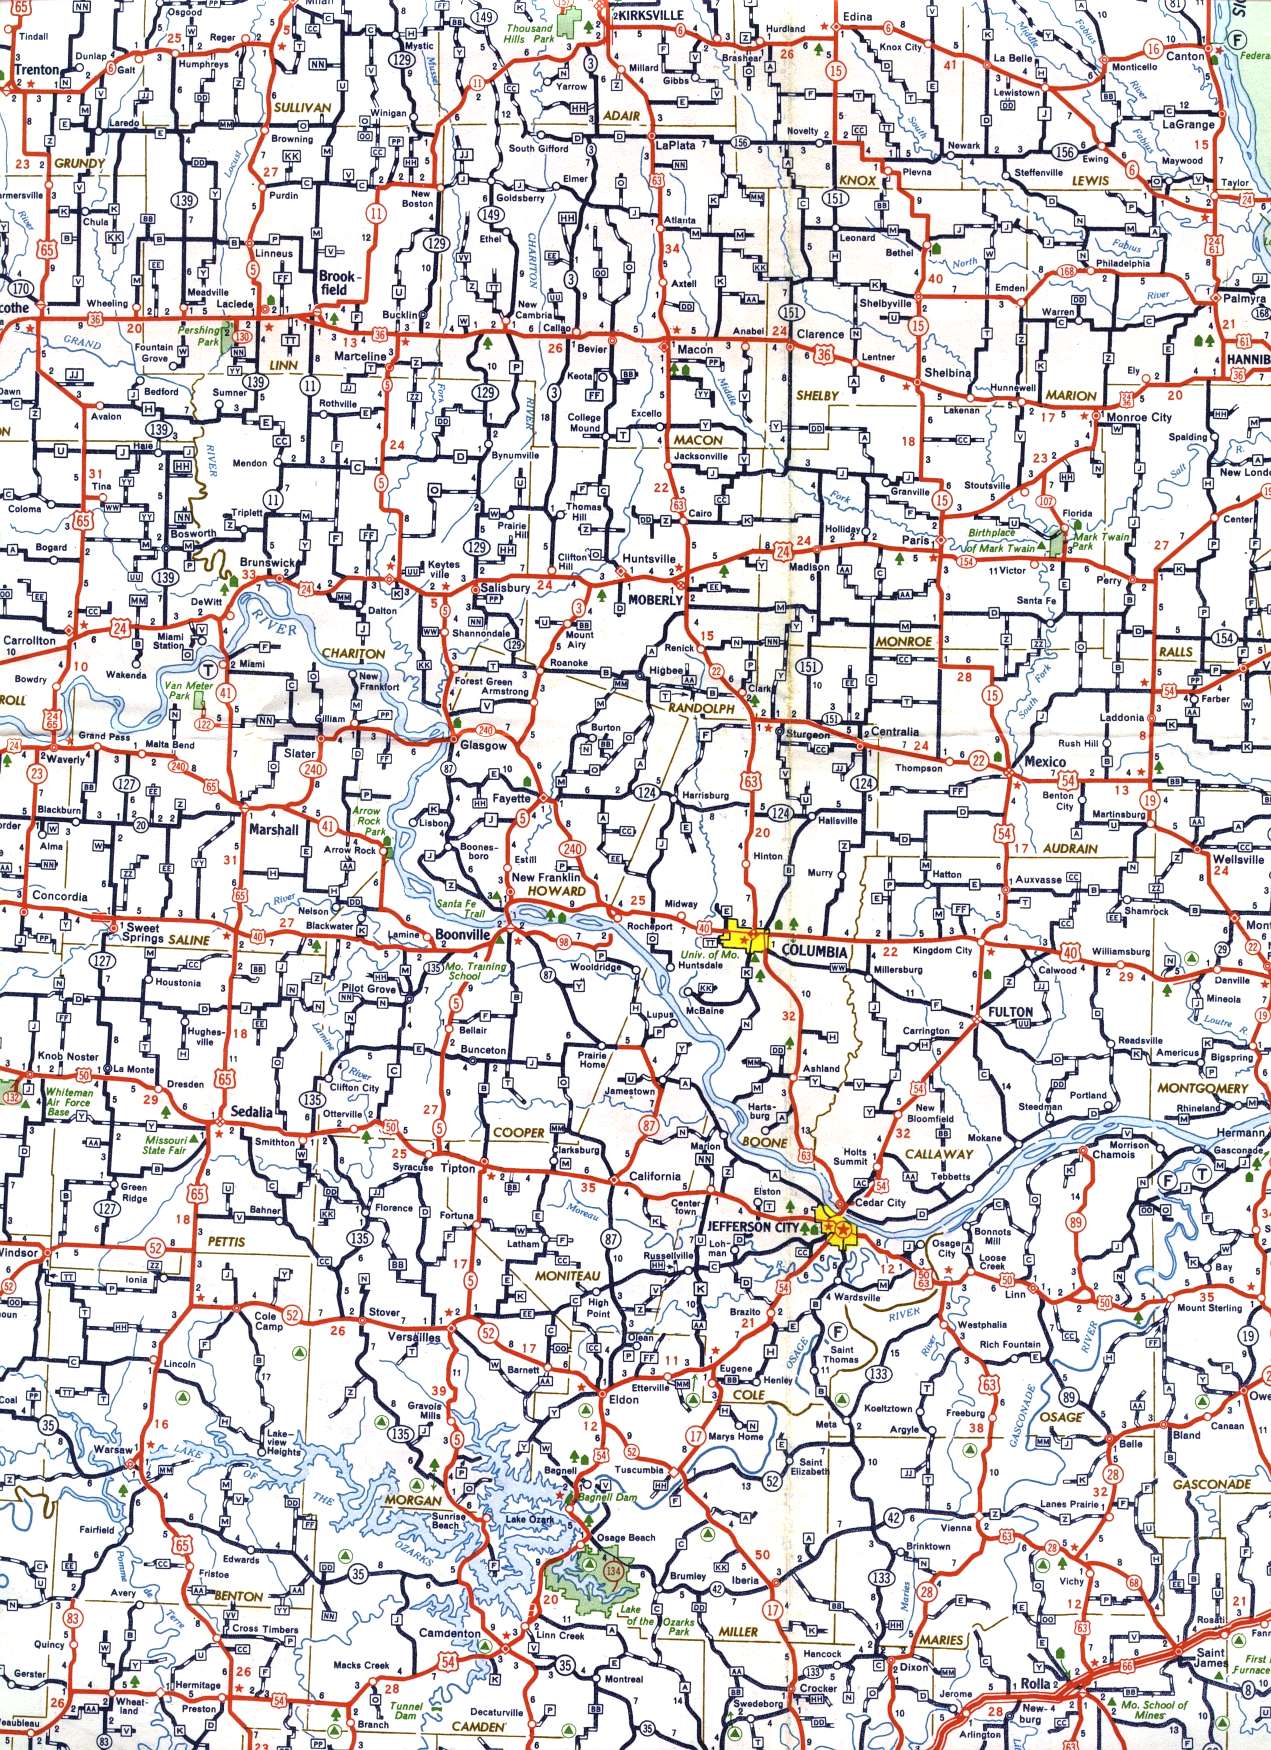 Central section of Missouri from 1958 official highway map